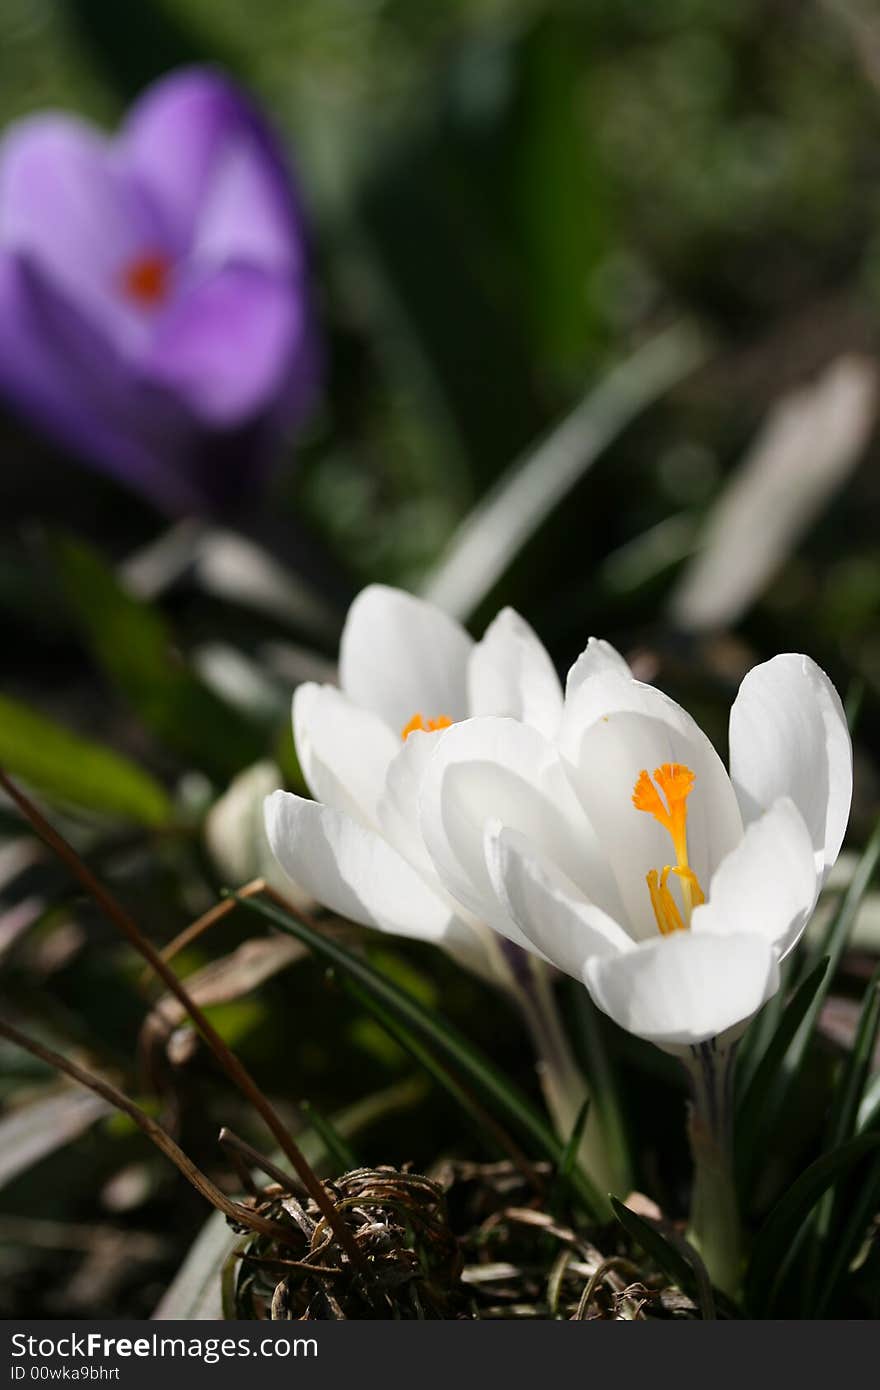 A close-up photo of crocus. Floral background.